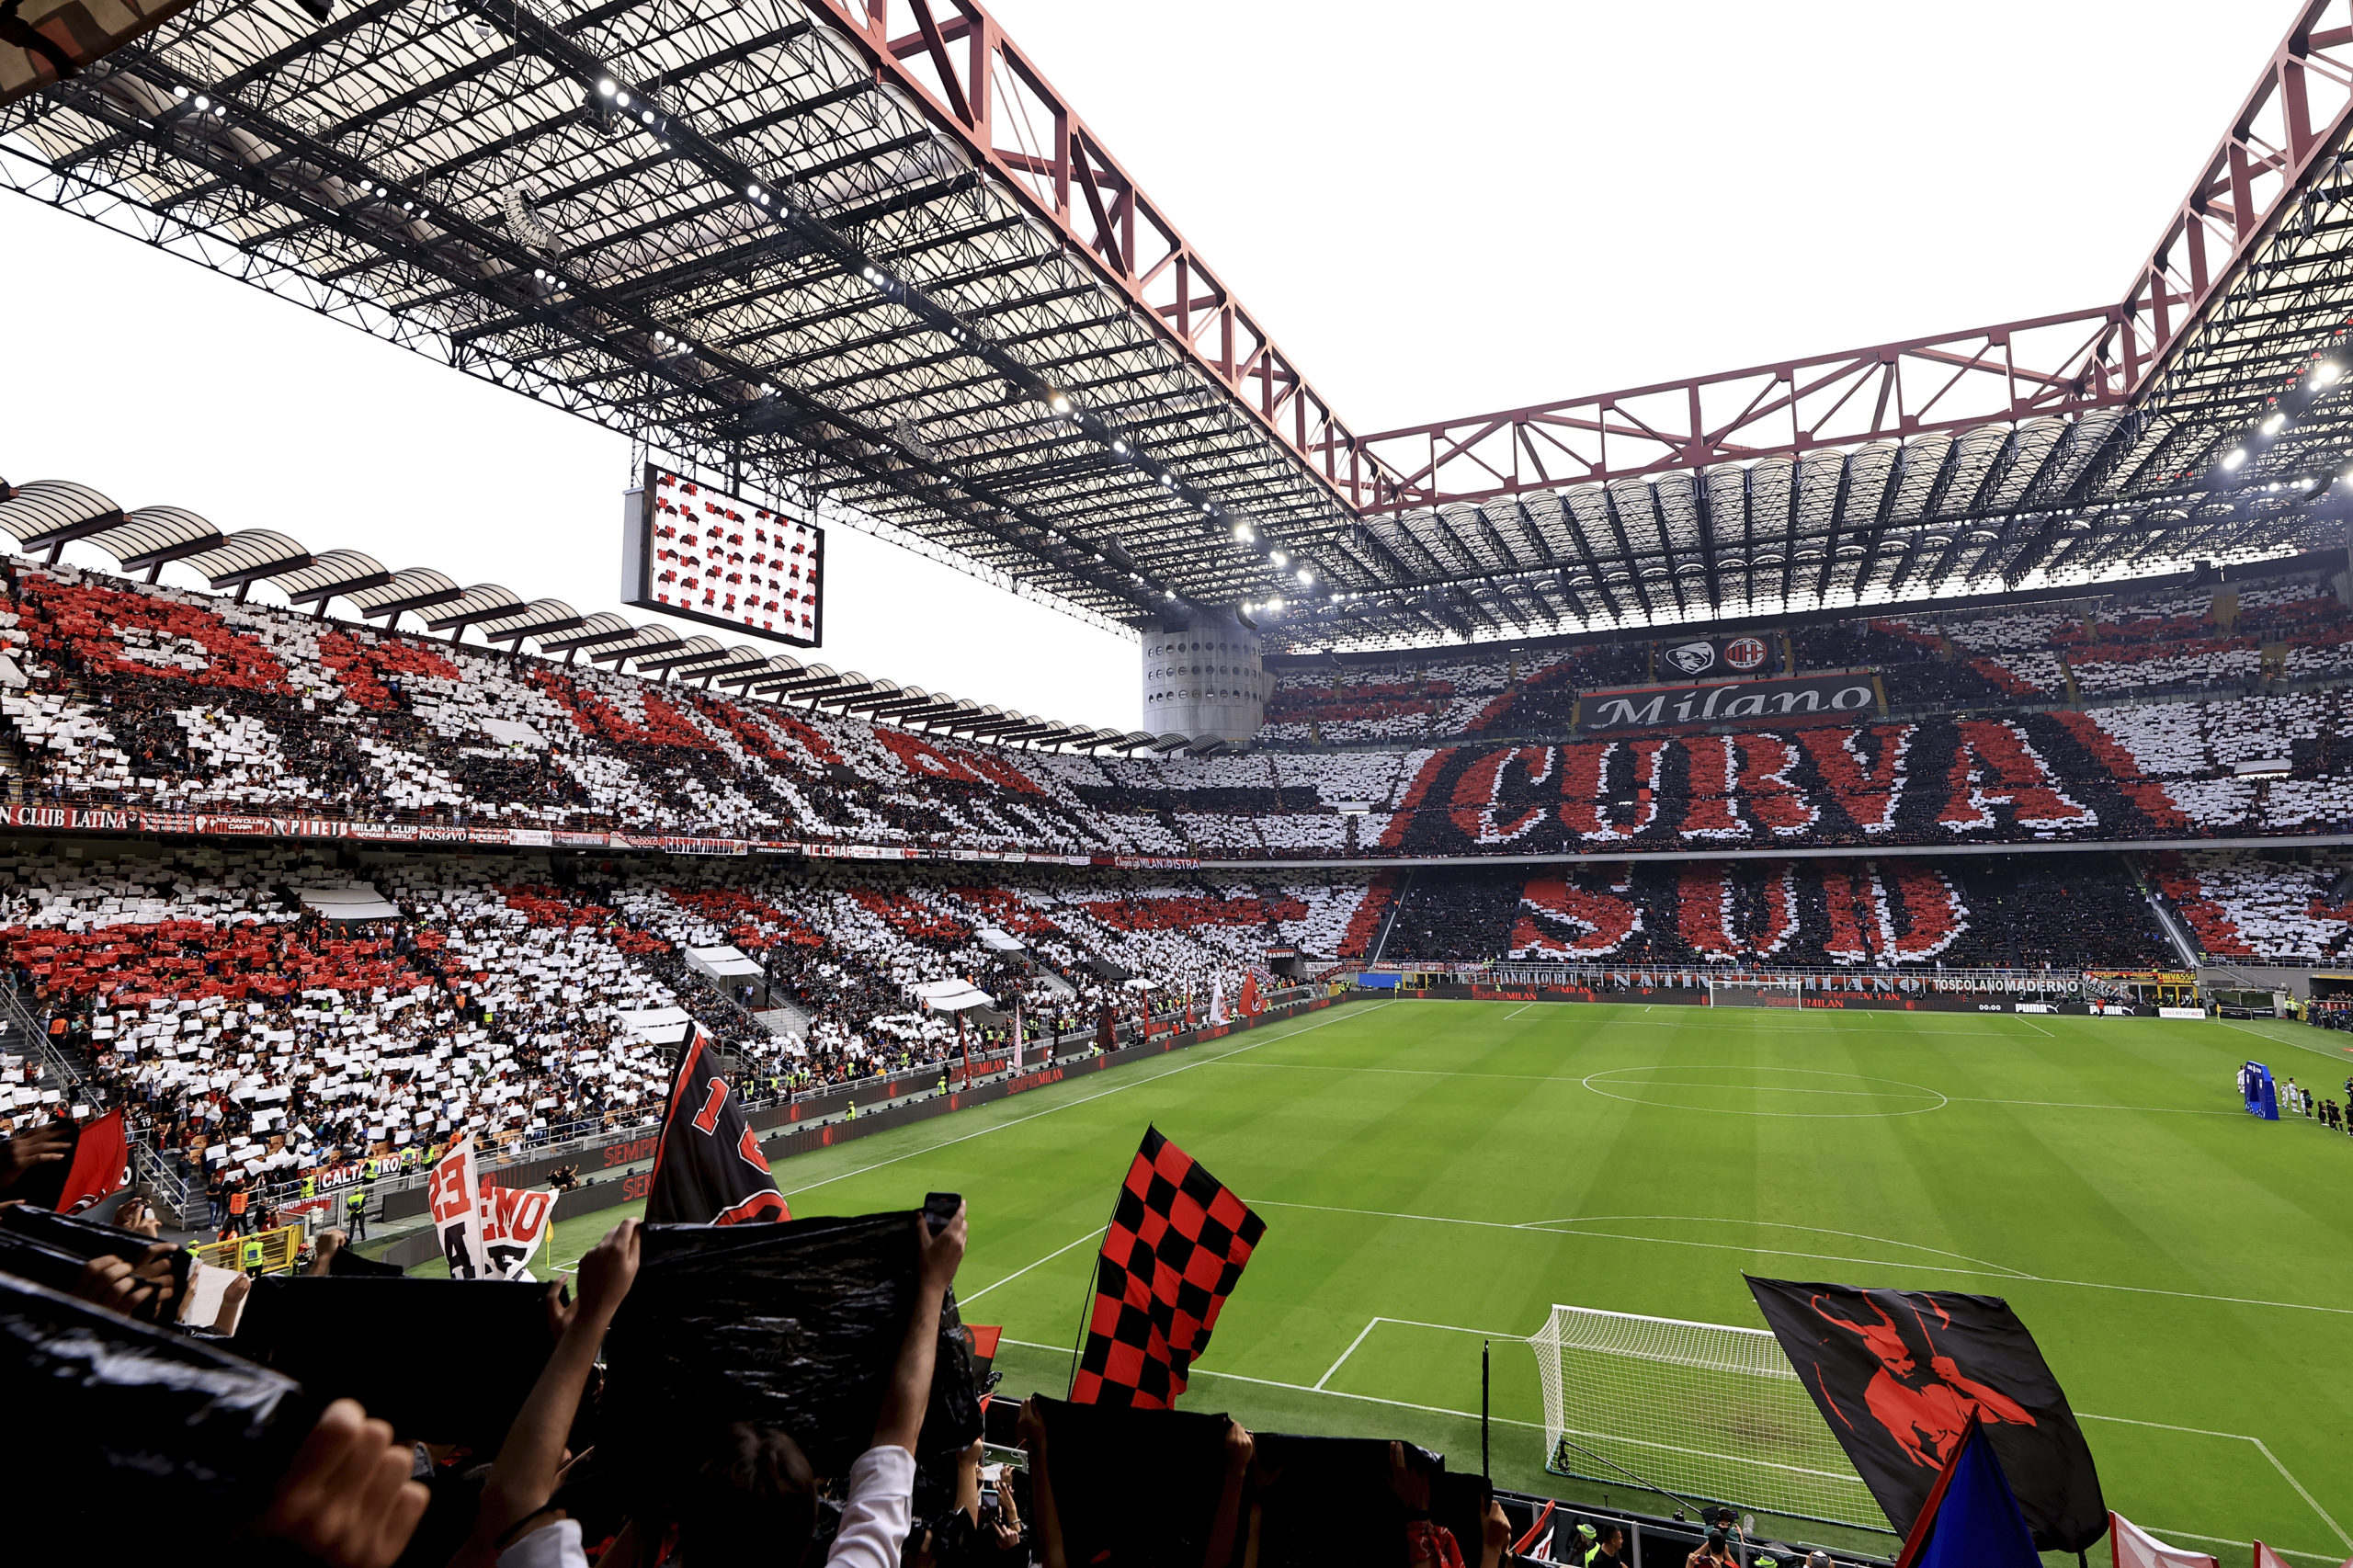 MILAN, ITALY - OCTOBER 08: A general view of a TIFO by AC Milan fans inside the stadium prior to kick off of the Serie A match between AC Milan and Juventus at Stadio Giuseppe Meazza on October 08, 2022 in Milan, Italy. (Photo by Giuseppe Cottini/AC Milan via Getty Images)